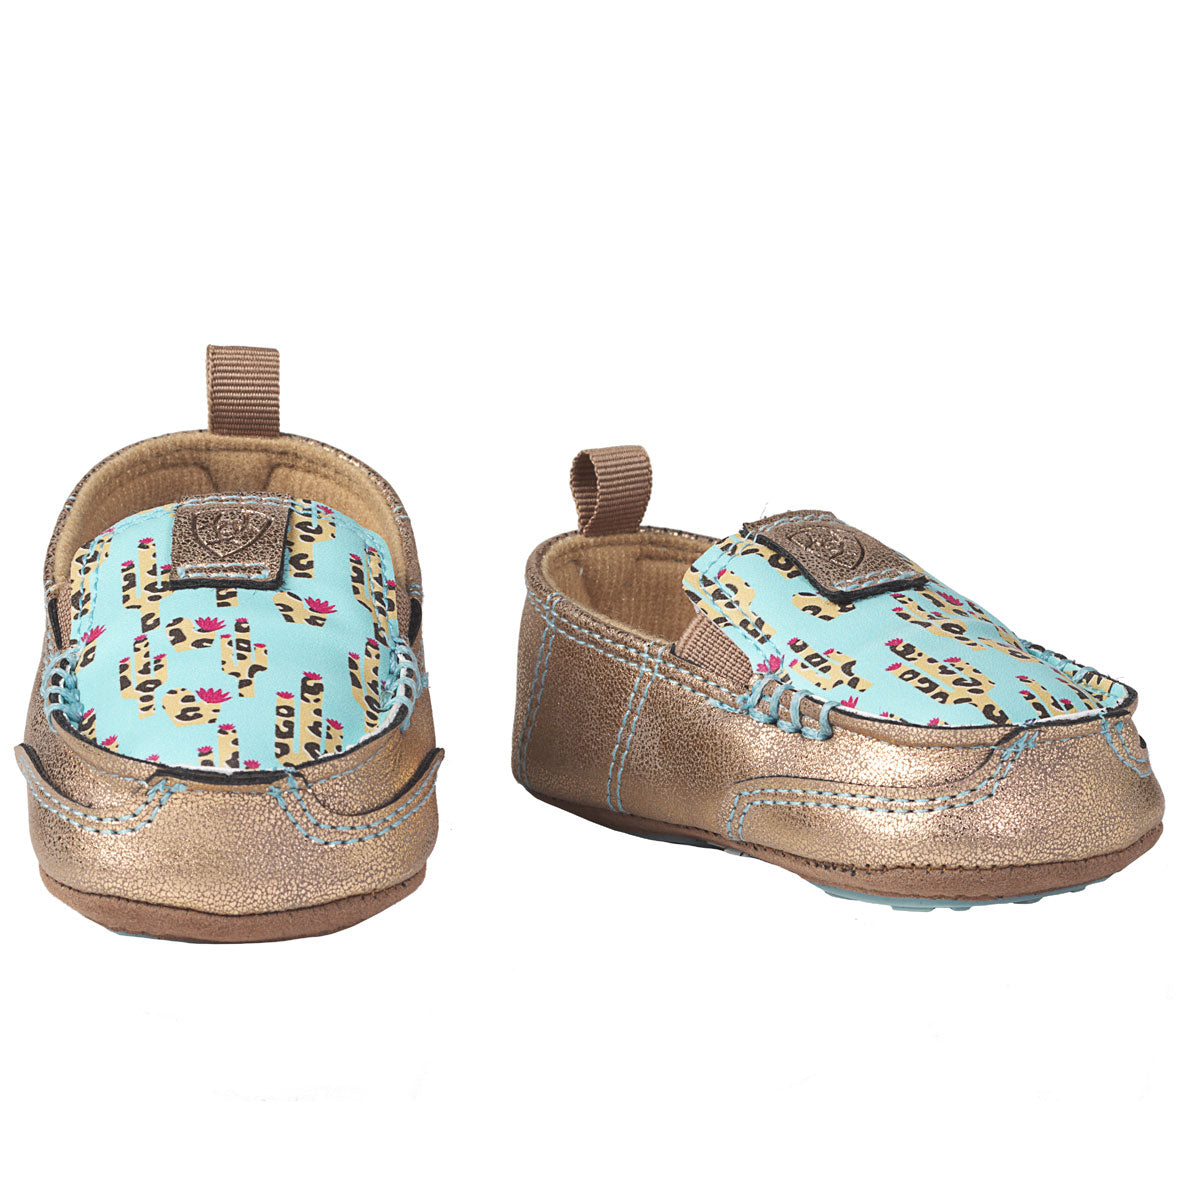 Ariat Infant Girl's Lil' Stompers Piper Cruiser Shoes - Turquoise